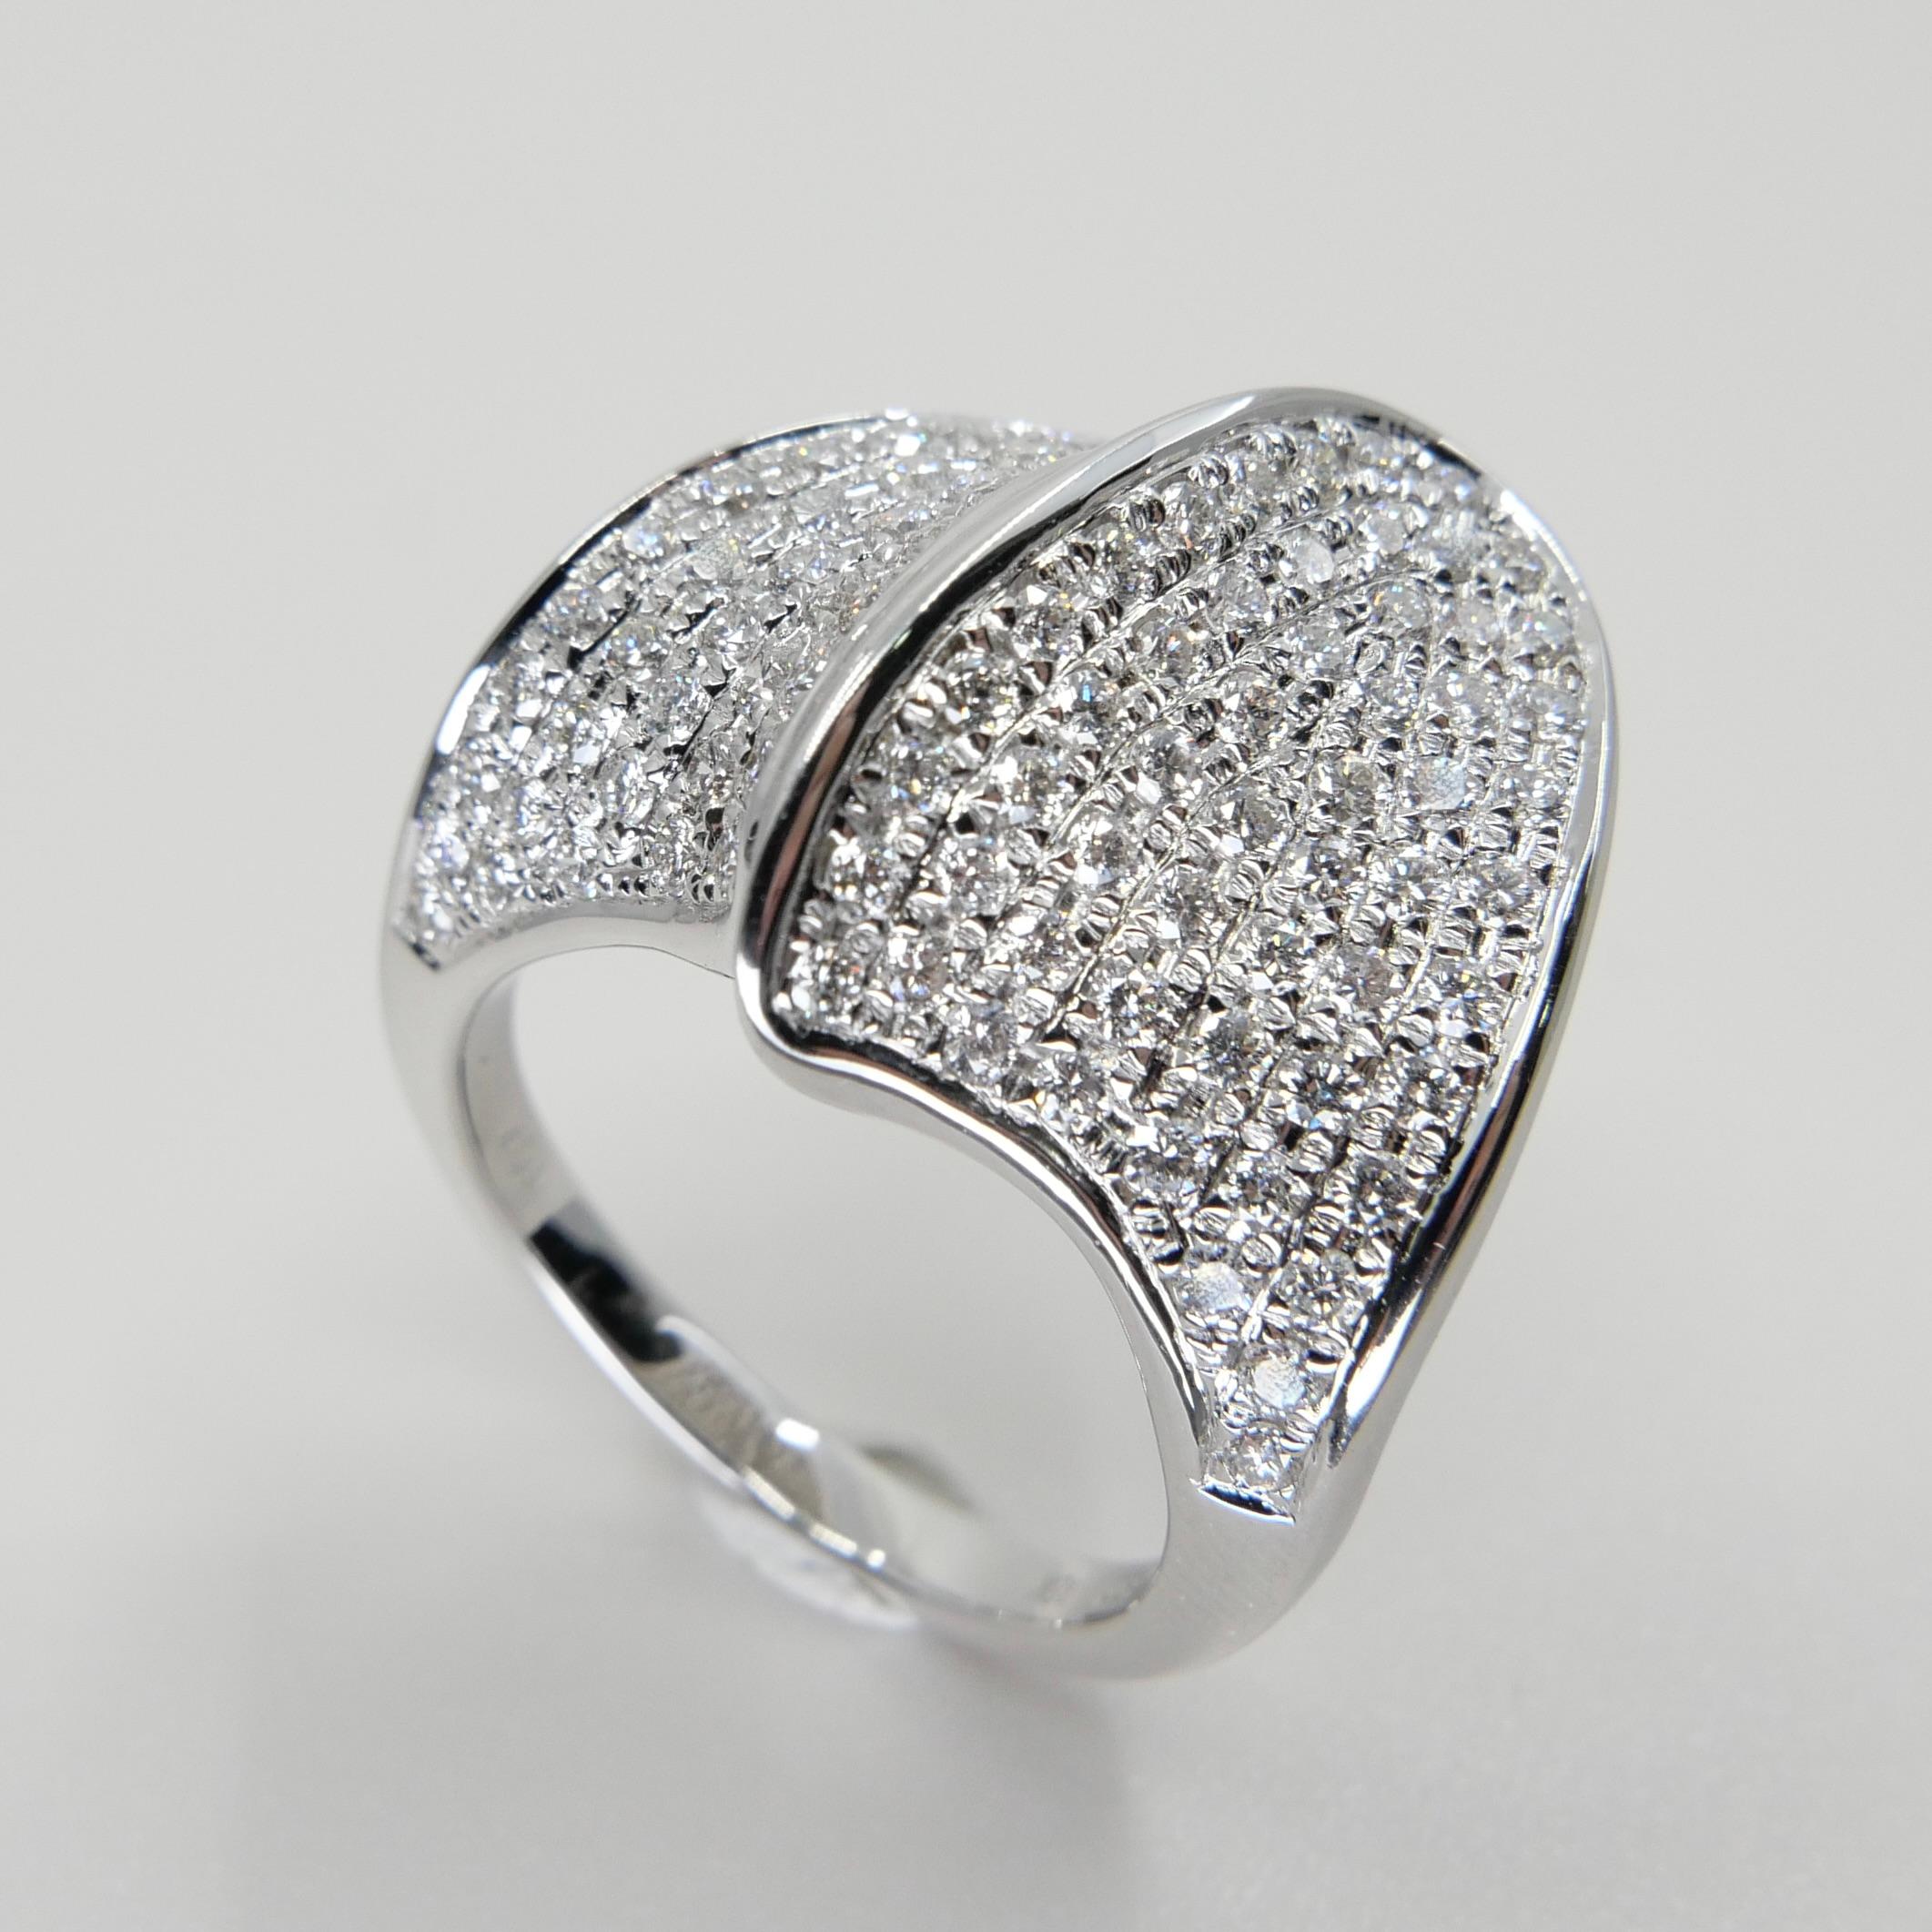 18K White Gold Cluster Diamond Cocktail Ring, 95 Diamonds, 1.07 CTW For Sale 1